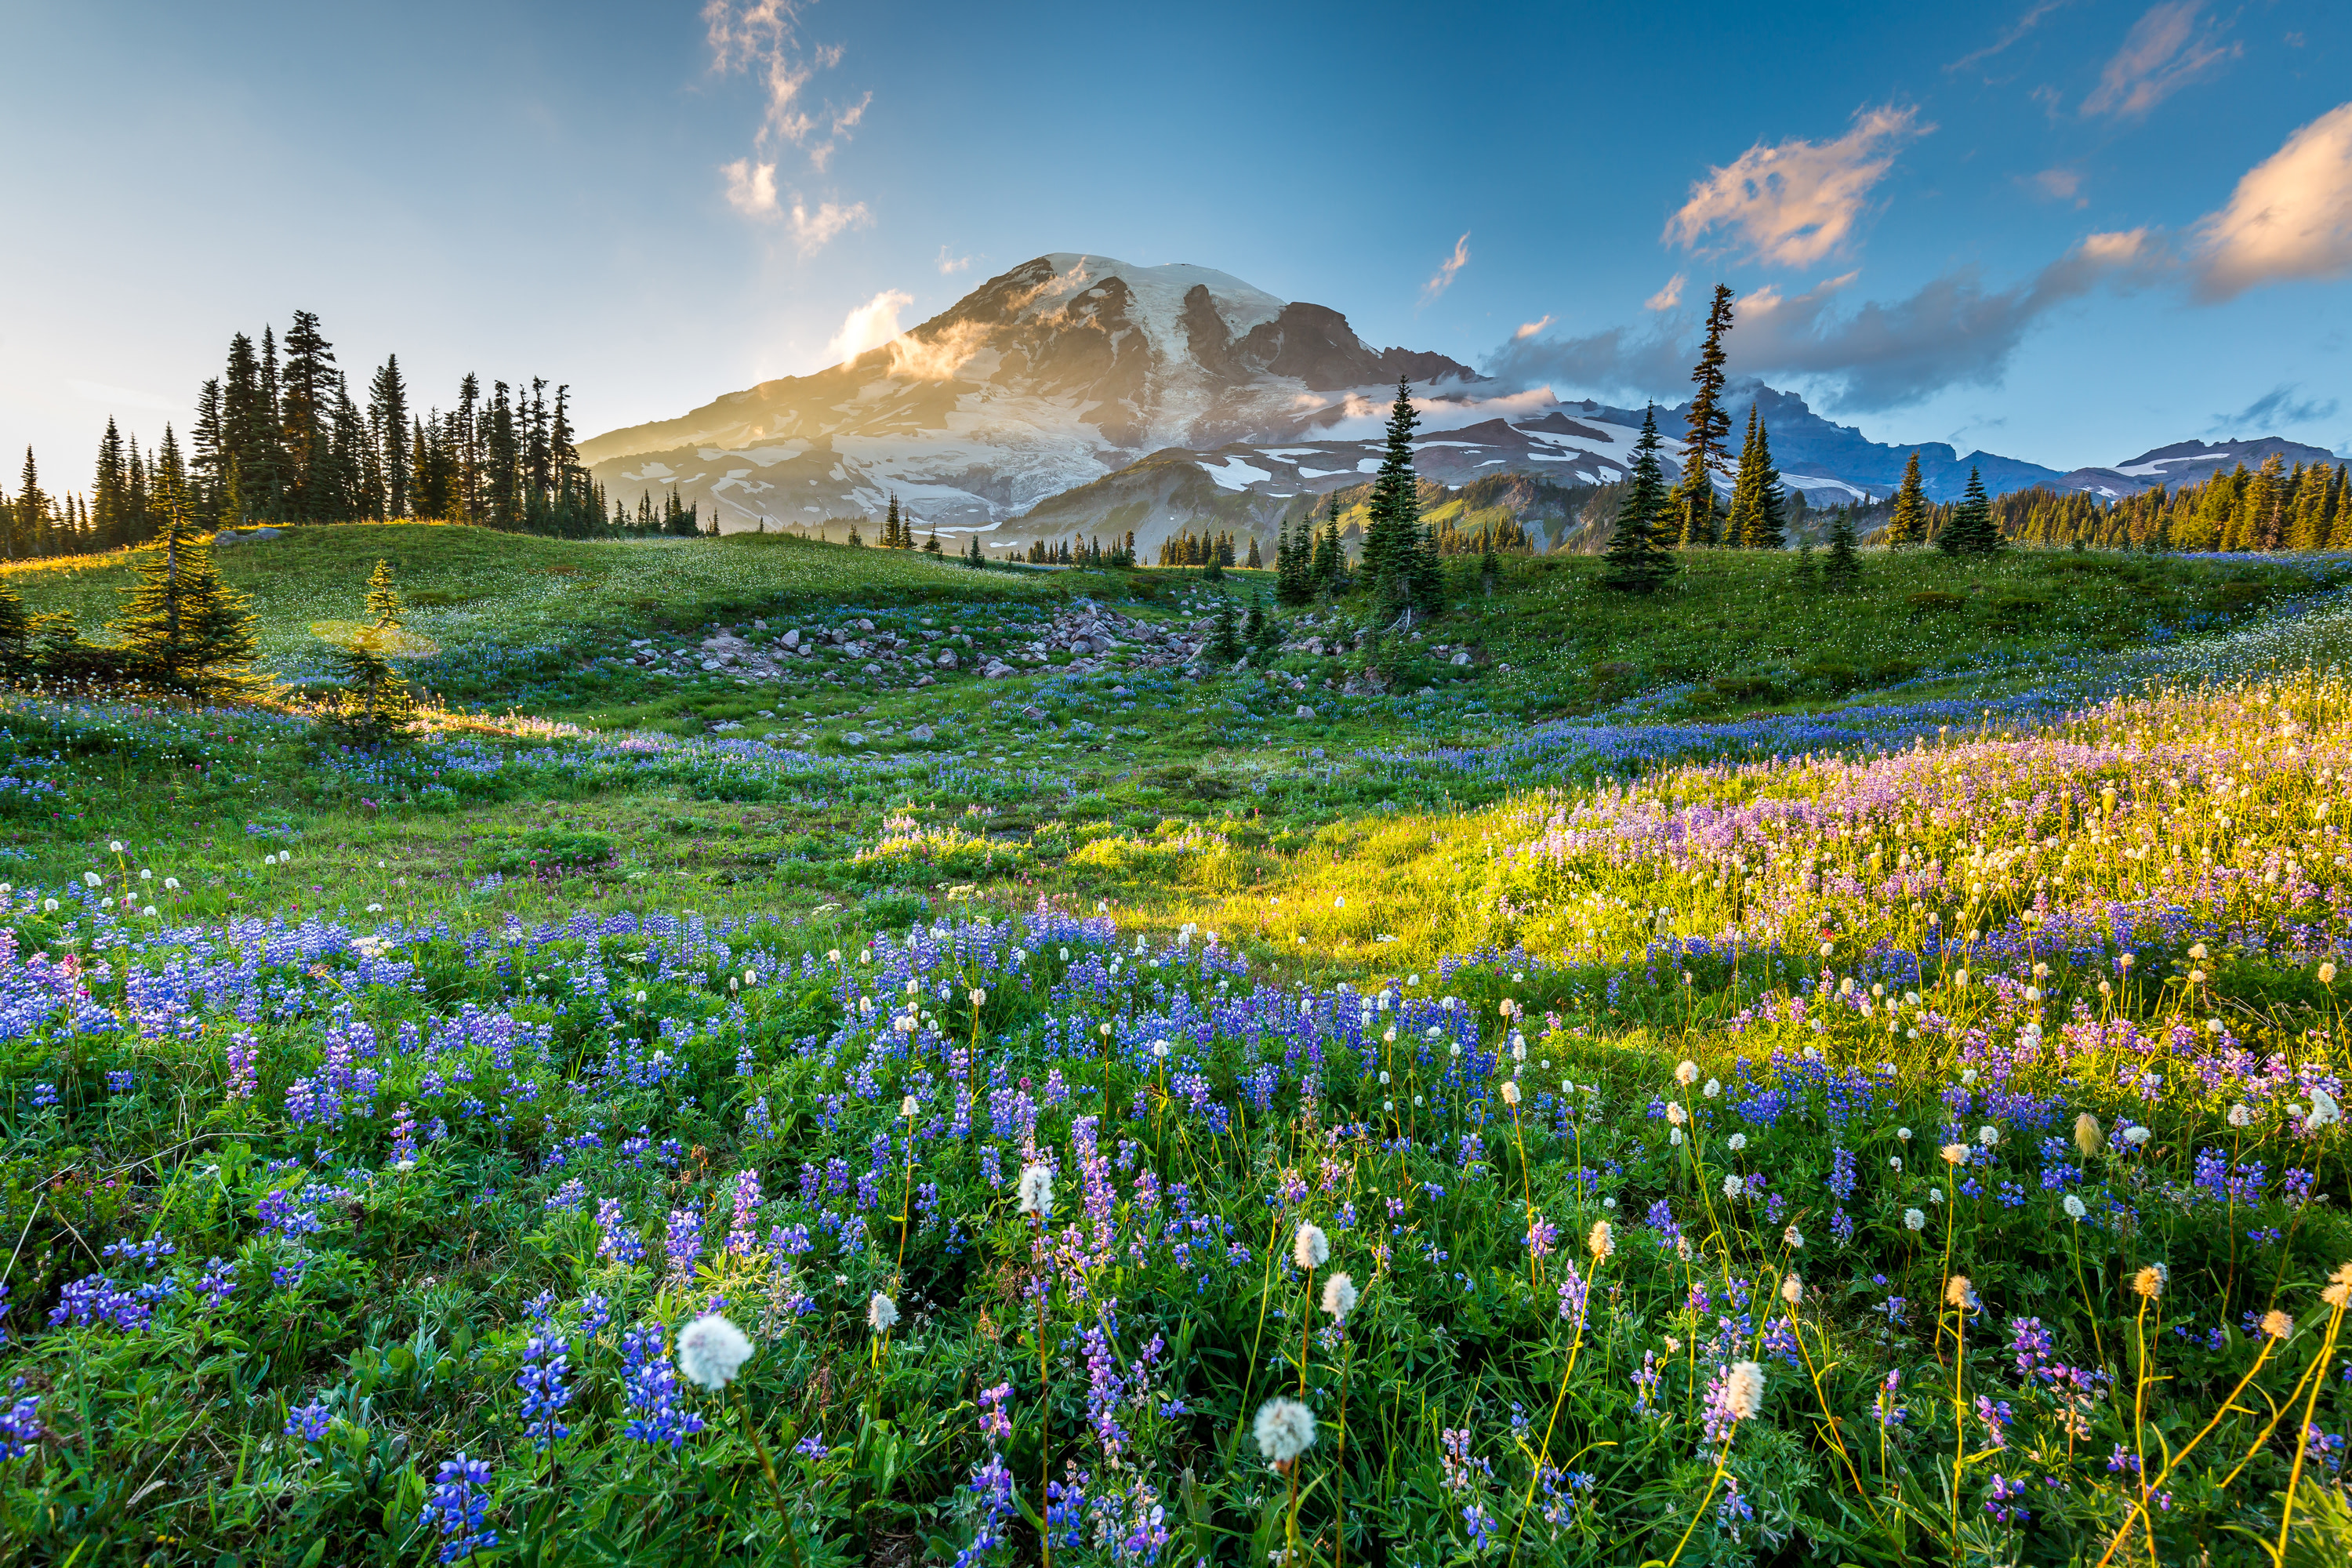 5 Places to See Stunning Wildflowers Across the U.S.